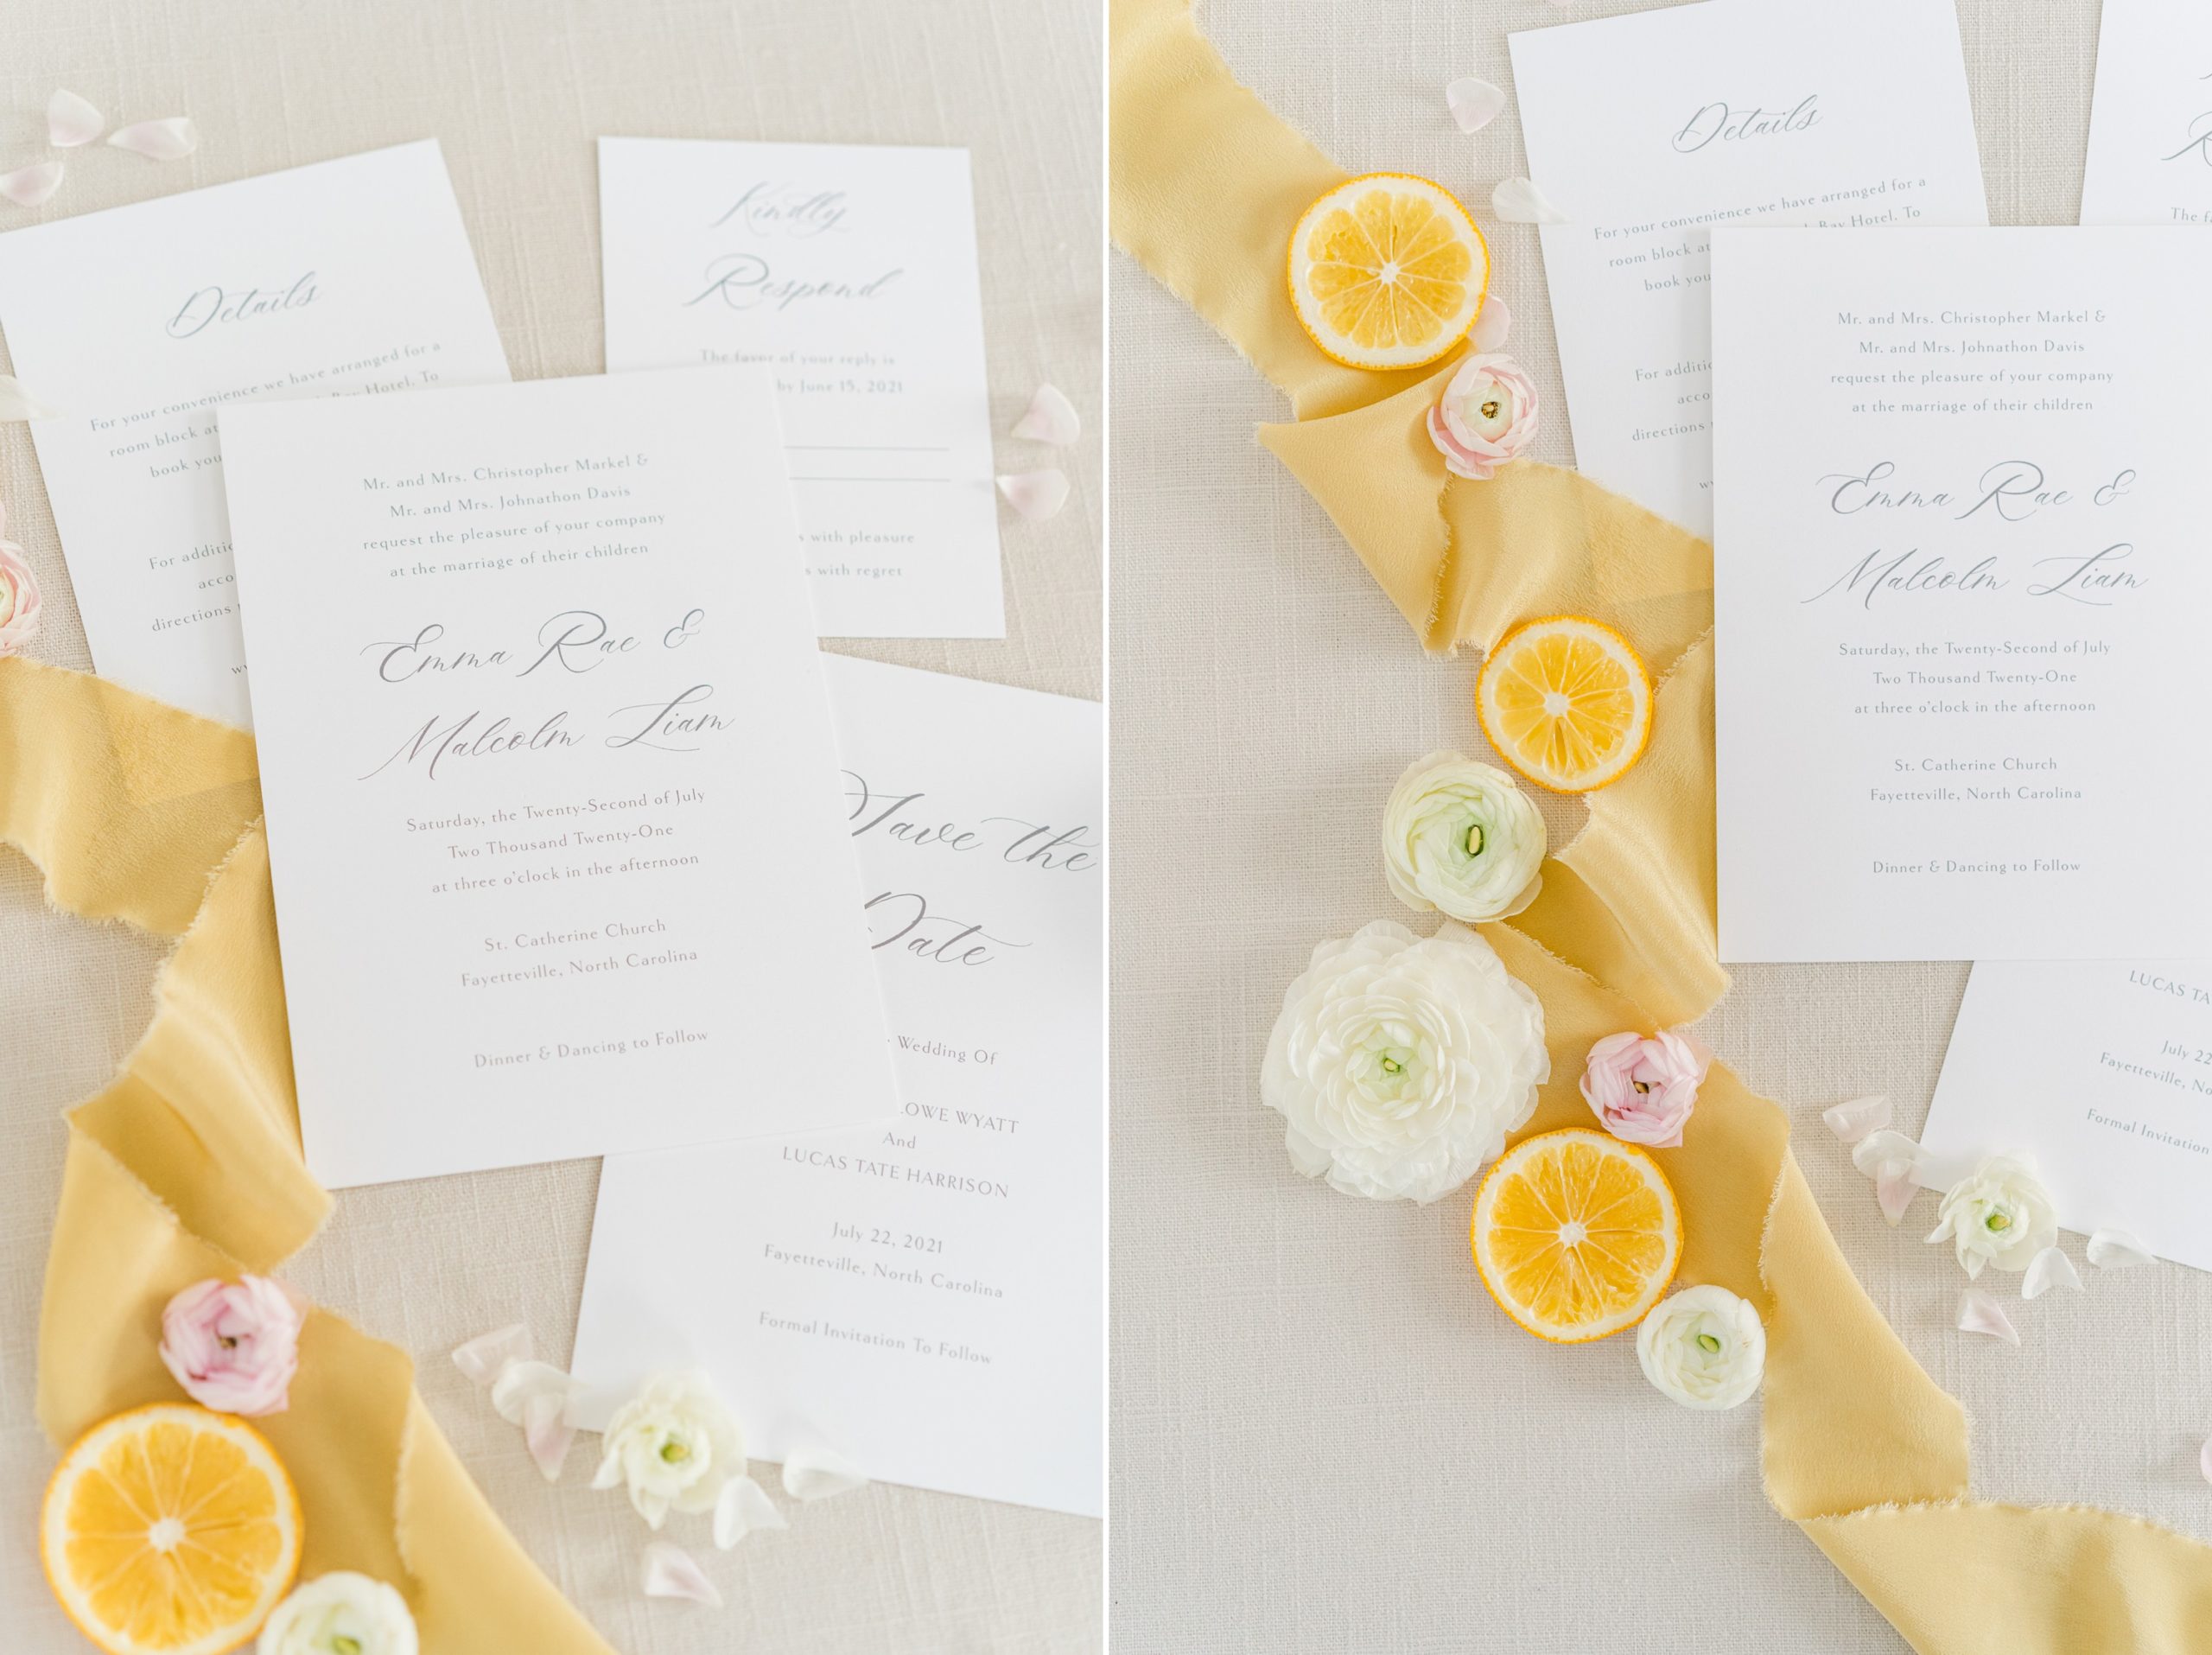 Best Place to Buy Timeless Wedding Invitations